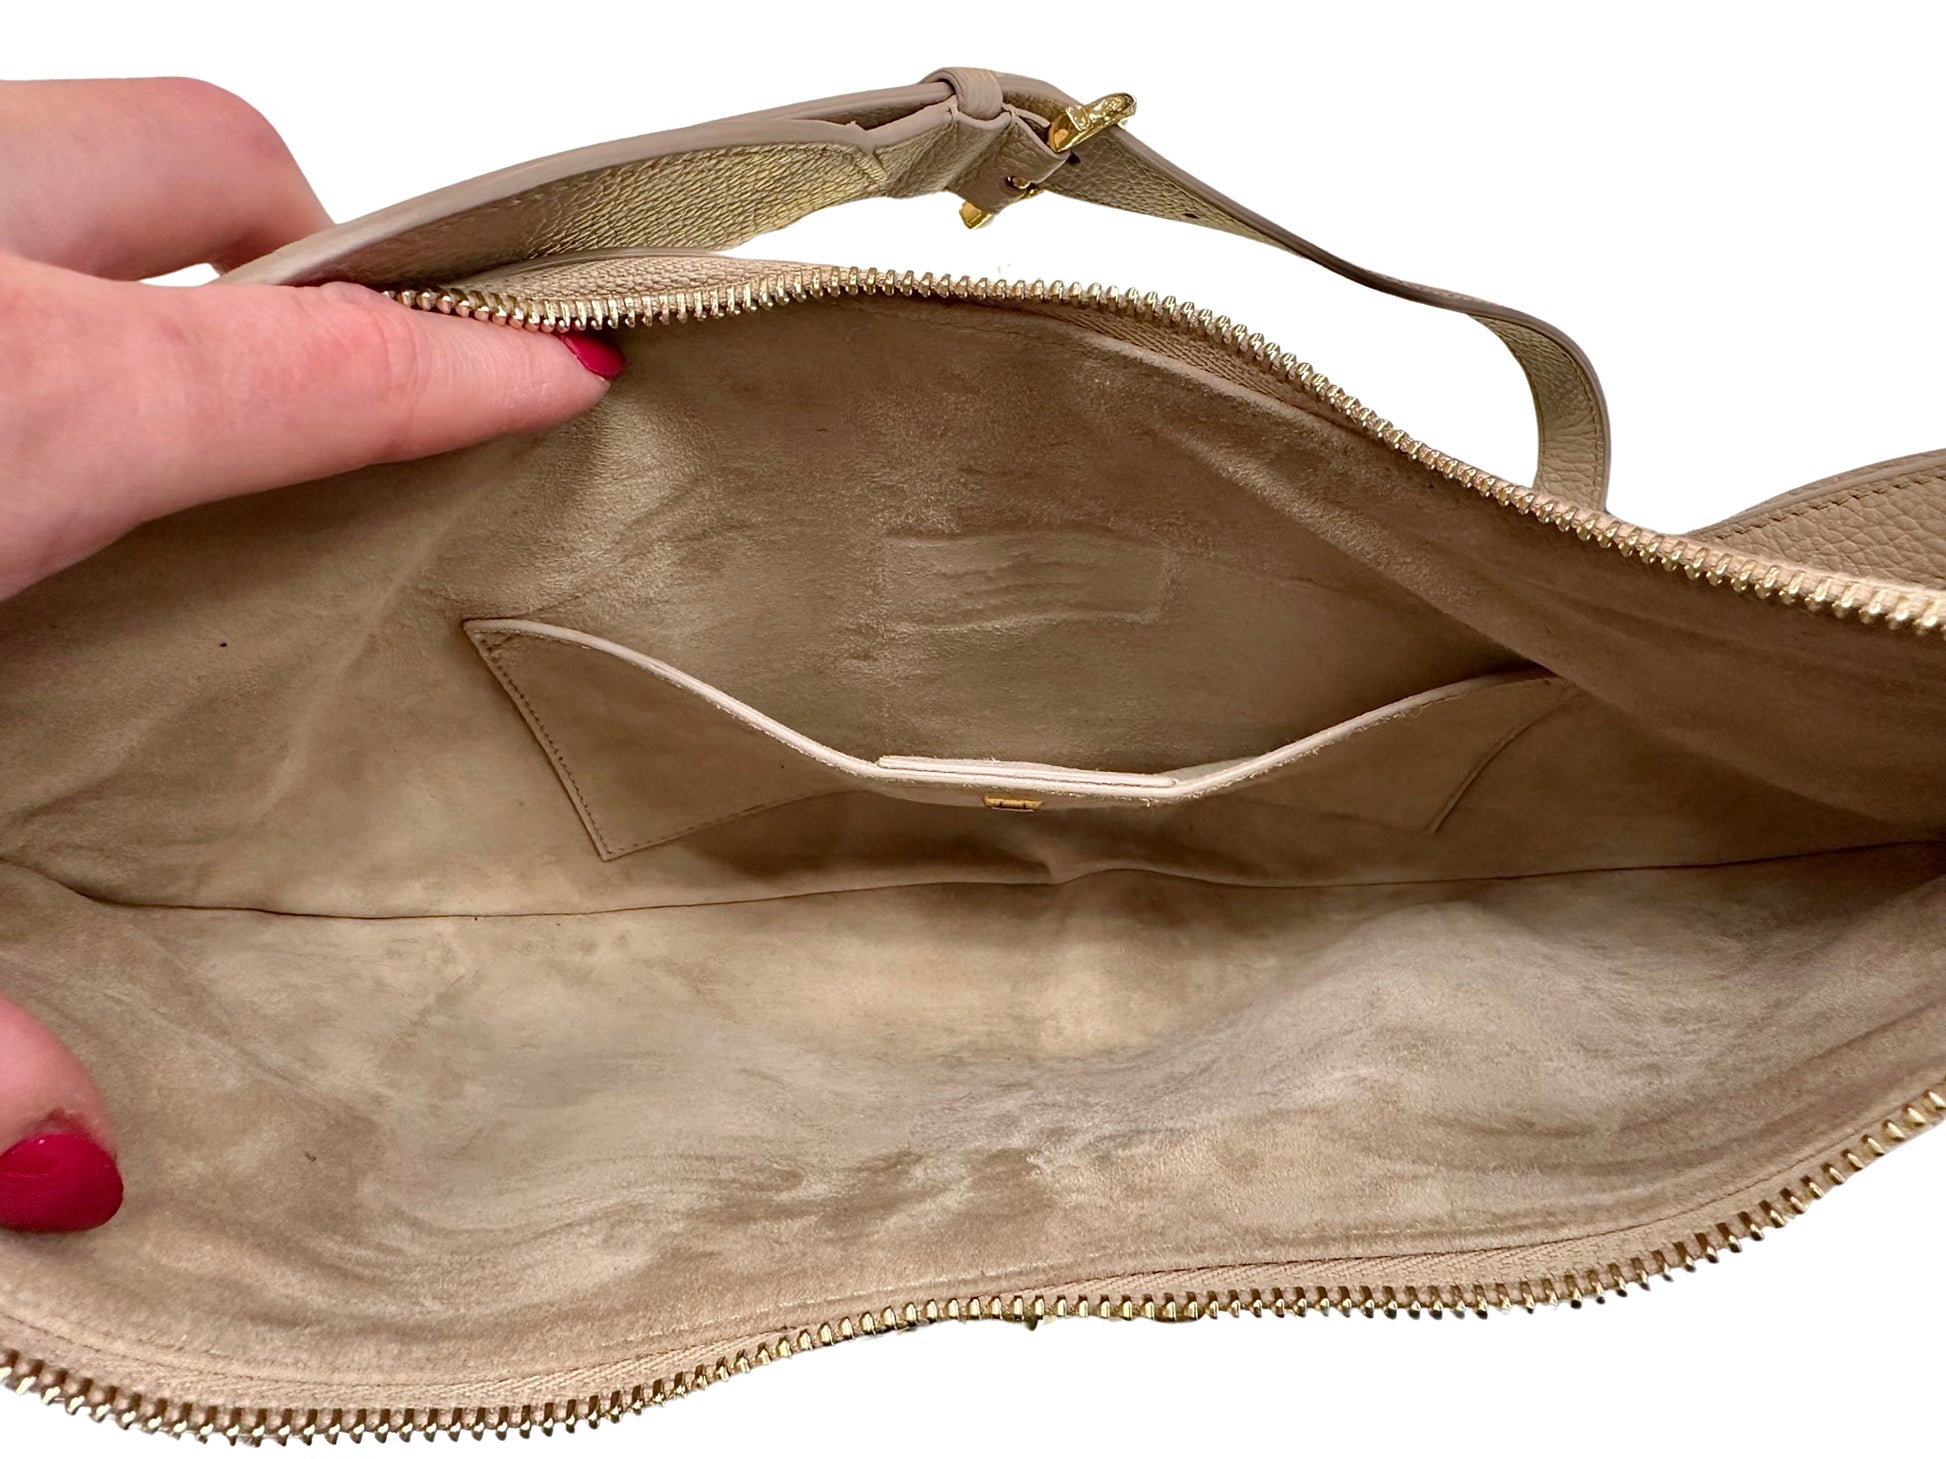 Suede interior of bag in pristine condition with 1 pocket